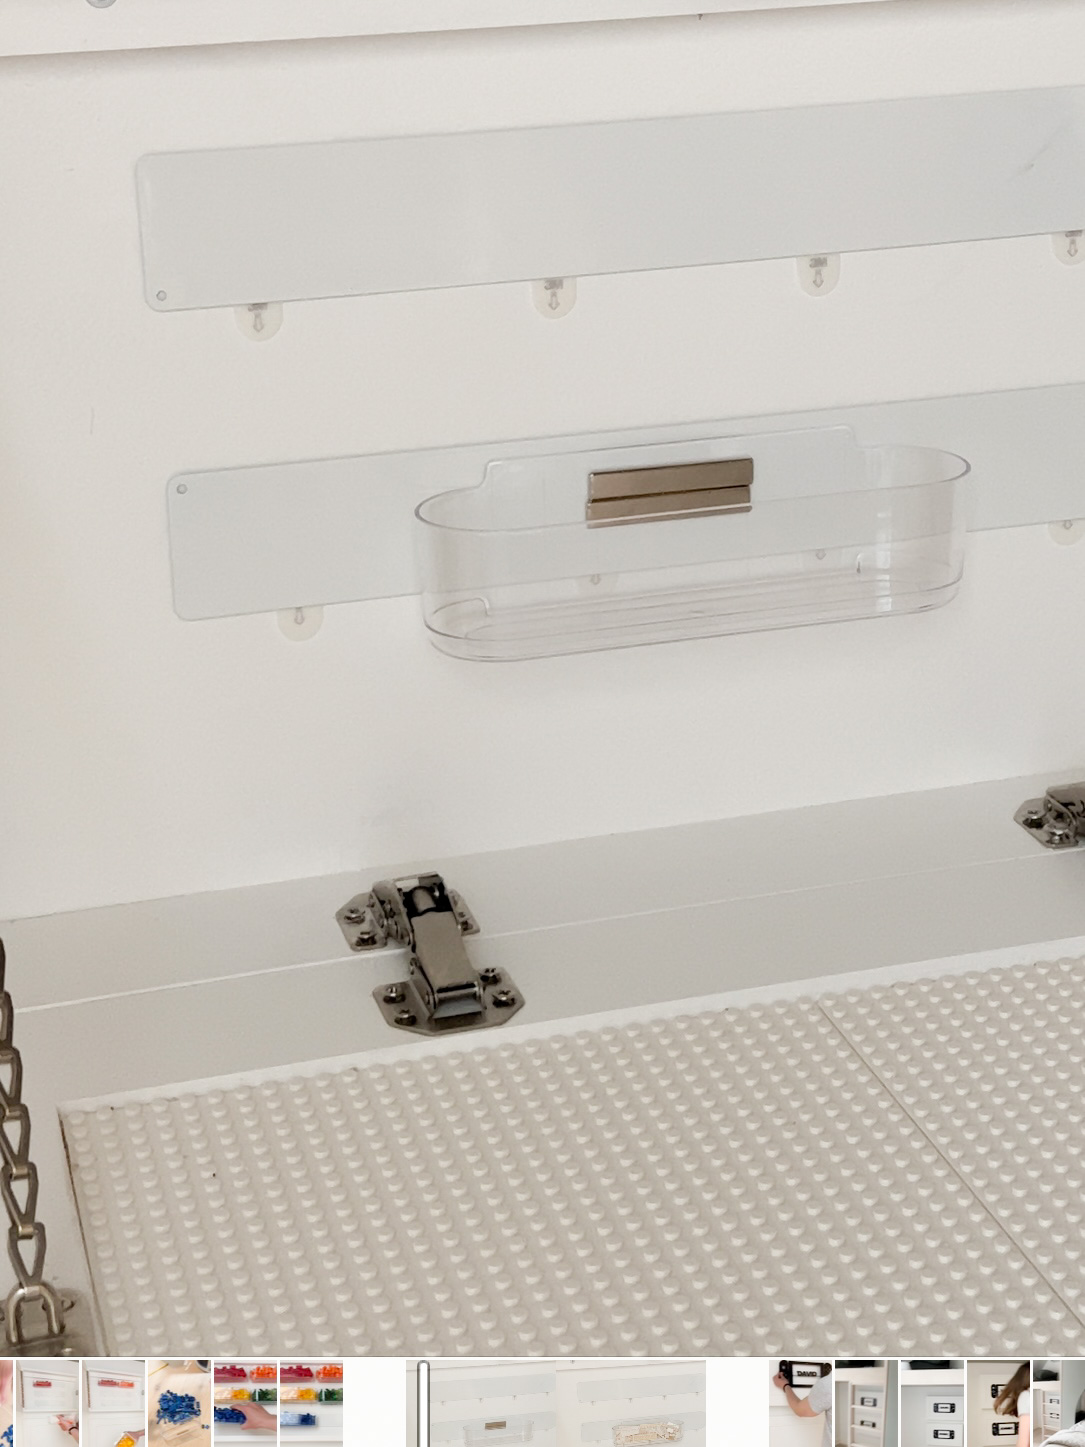 Image showing lego container attached to magnetic strip.